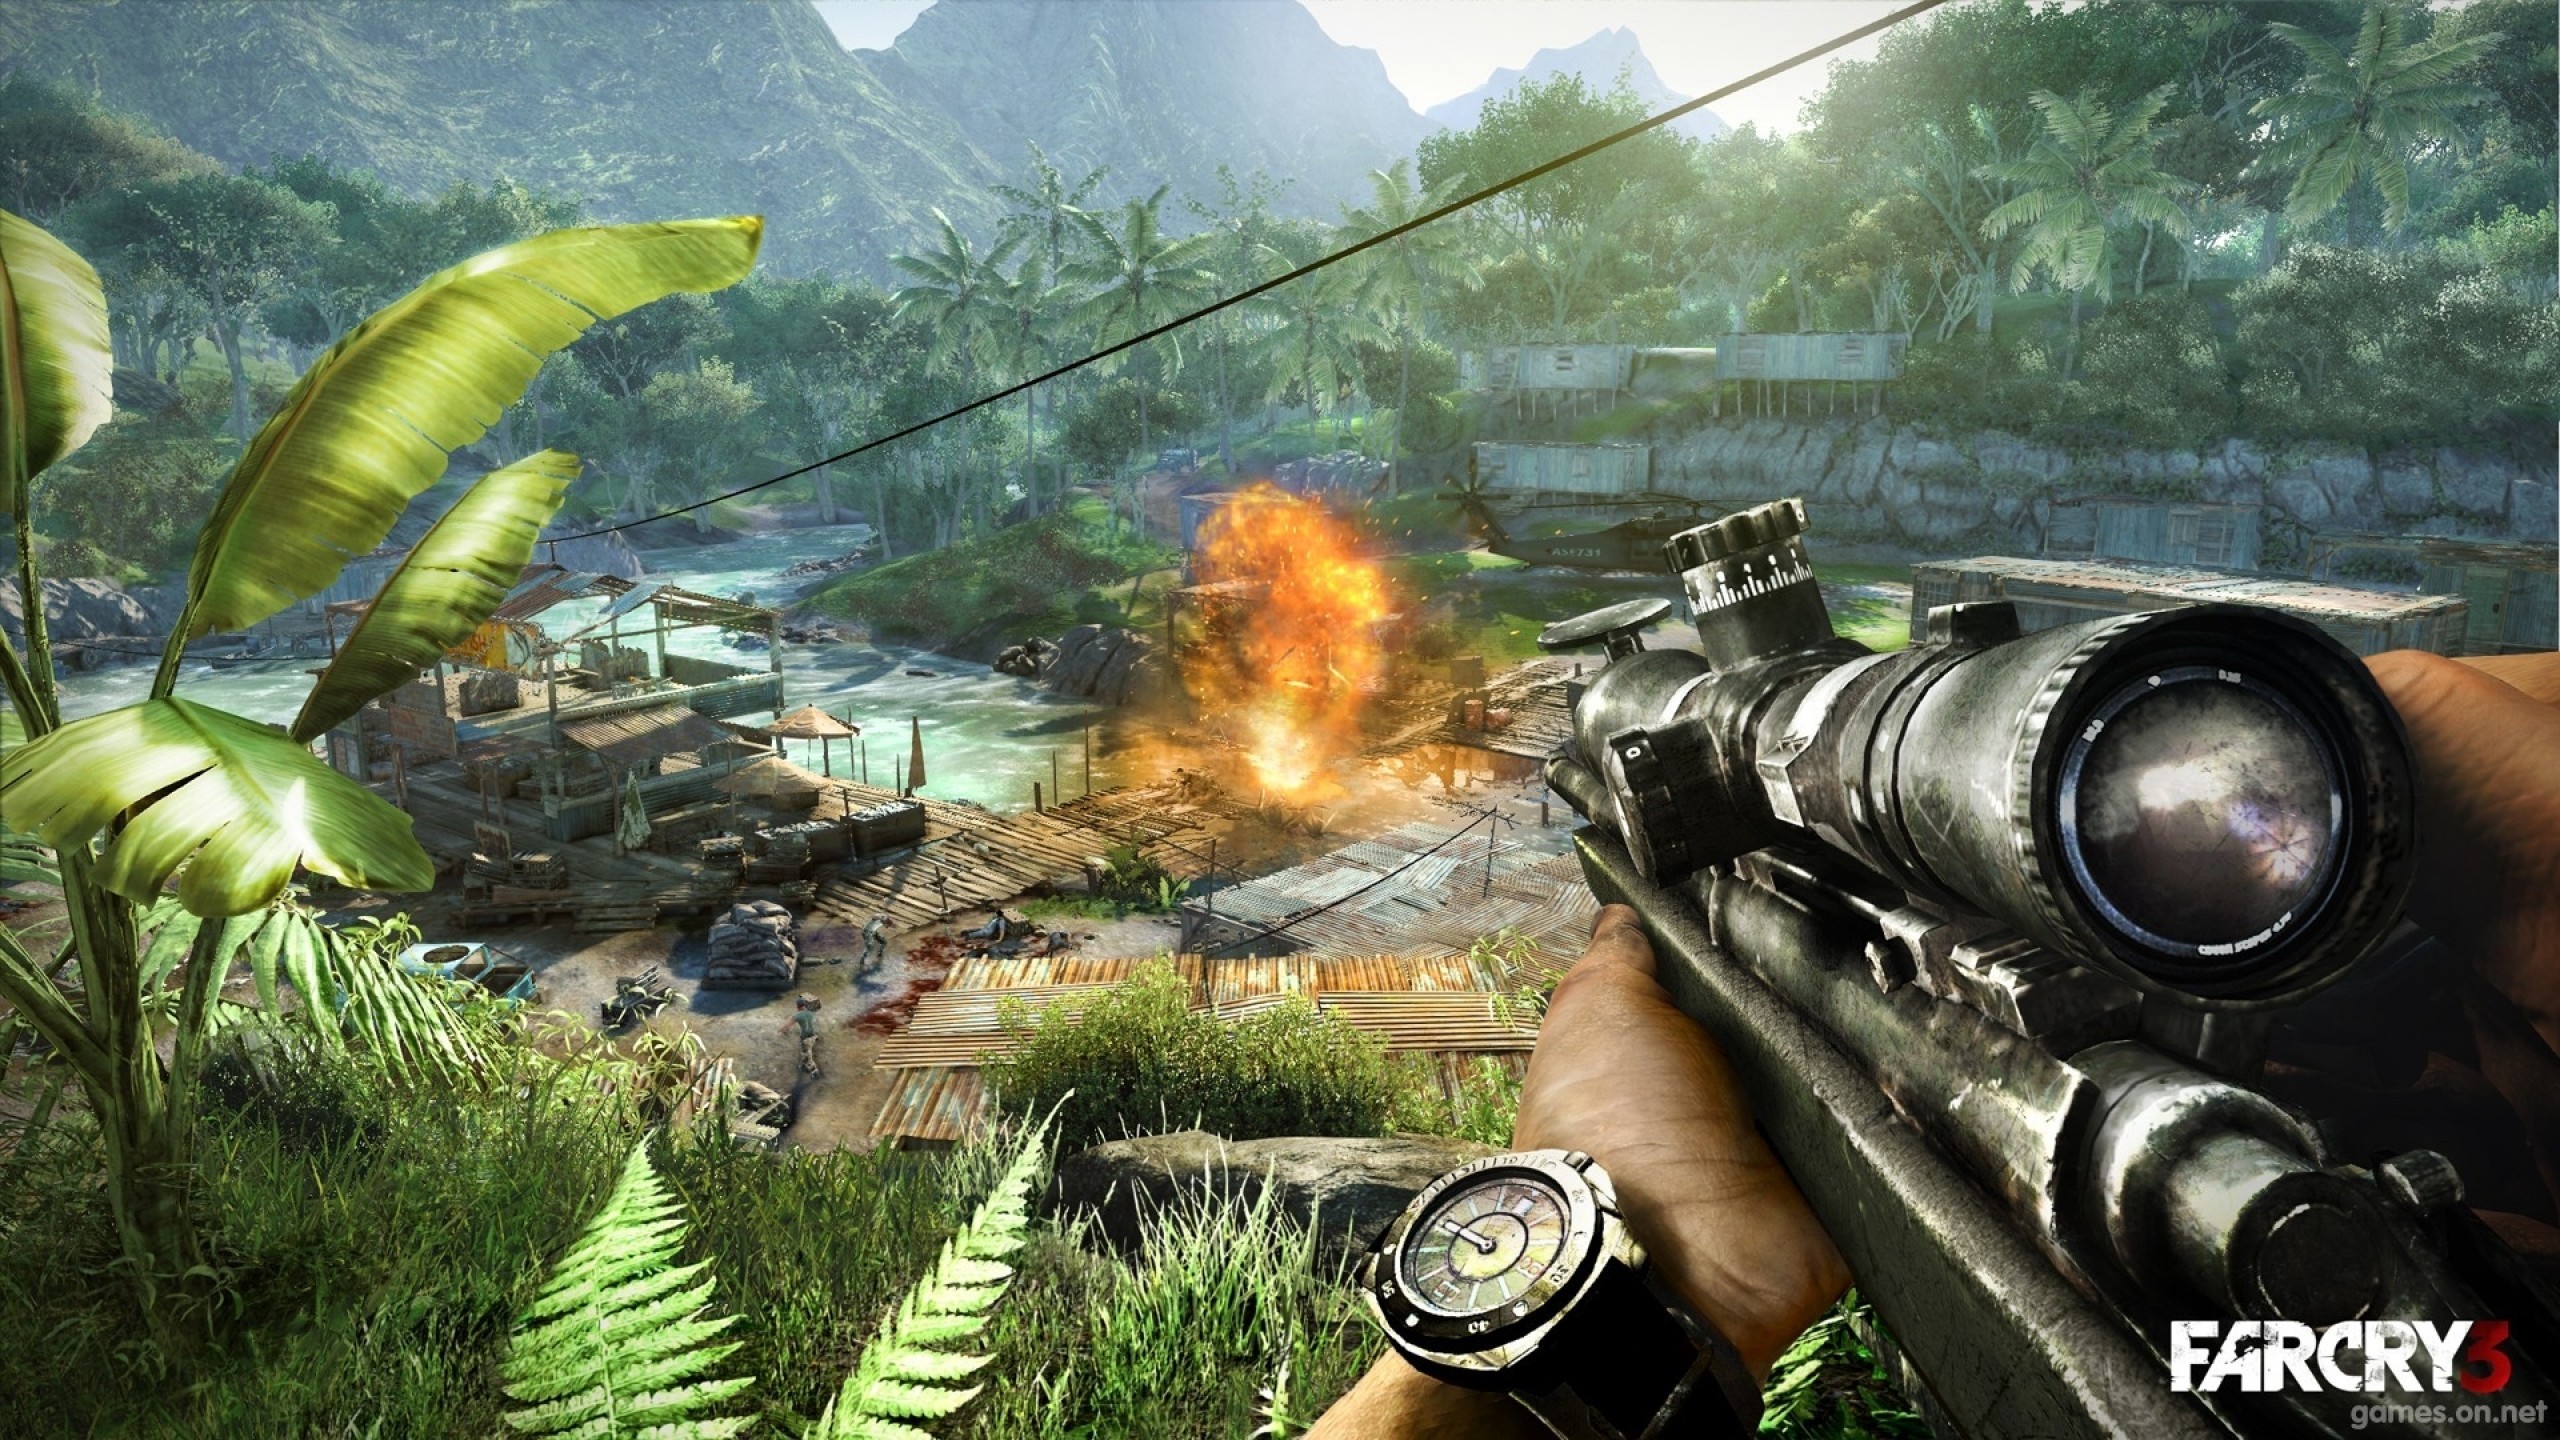 2560x1440 Download Wallpaper Â· Back. snipers far cry 3 ...